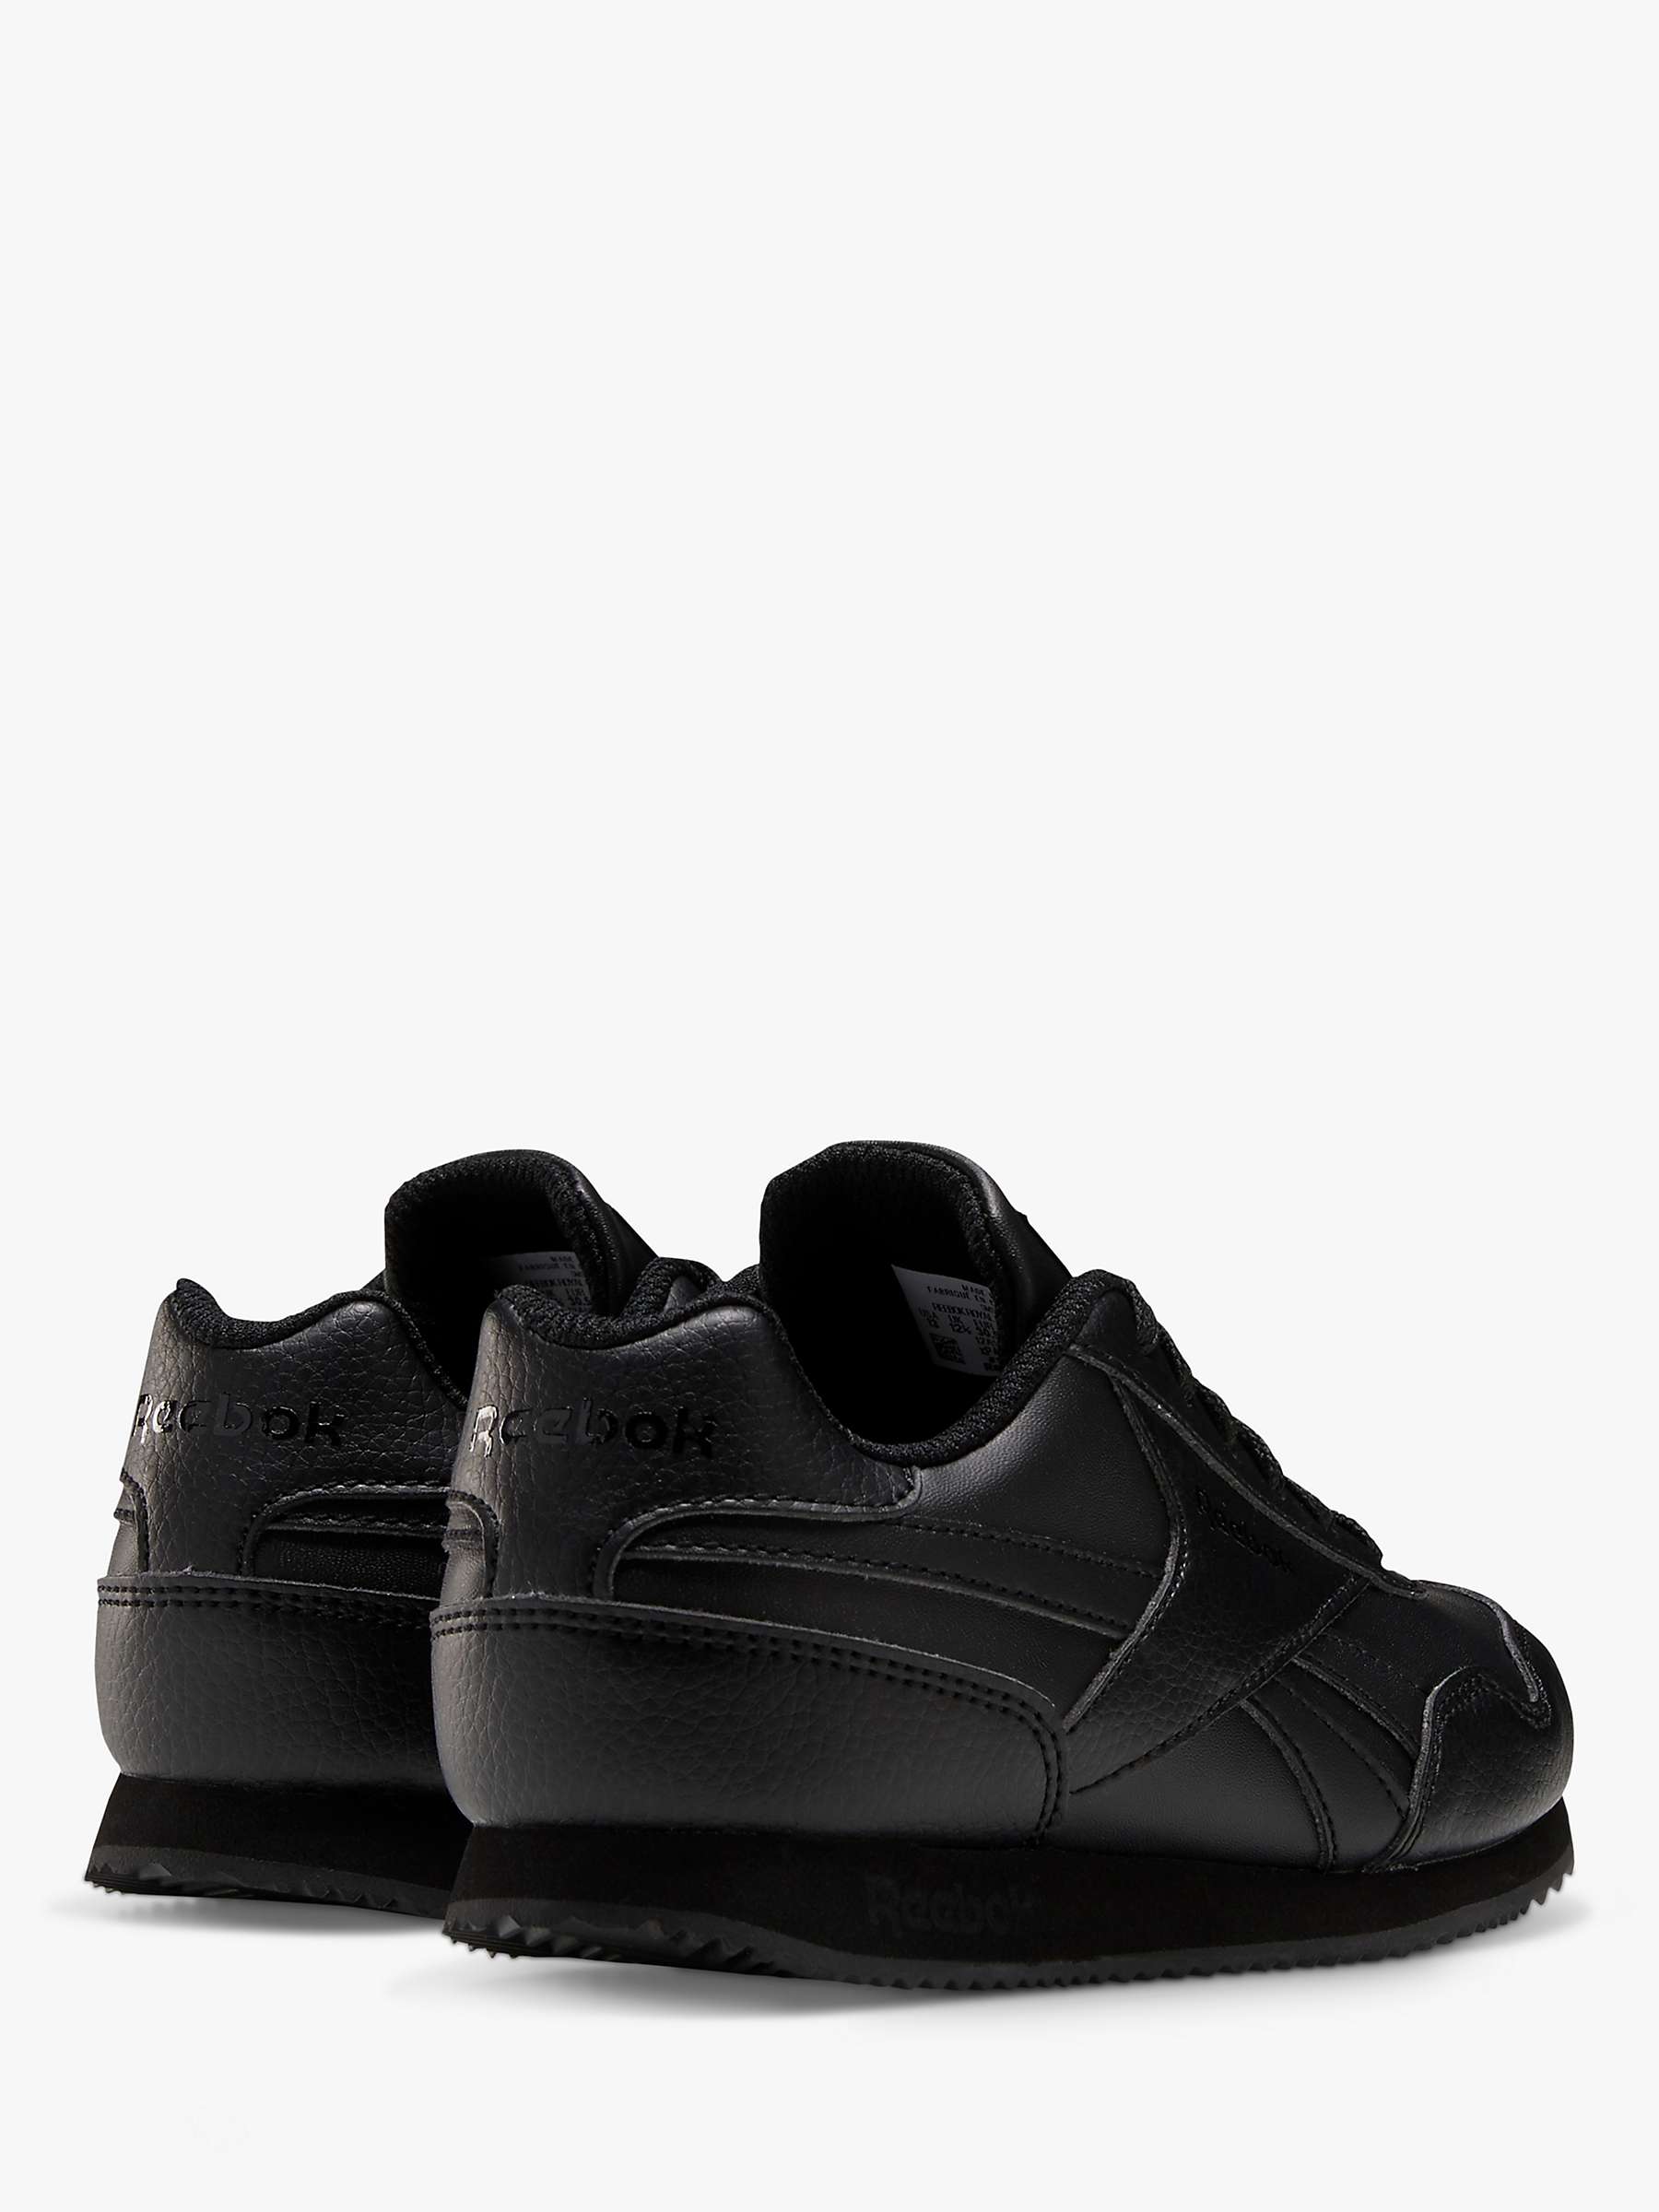 Buy Reebok Kids' Royal Classic Jogger 3 Trainers Online at johnlewis.com